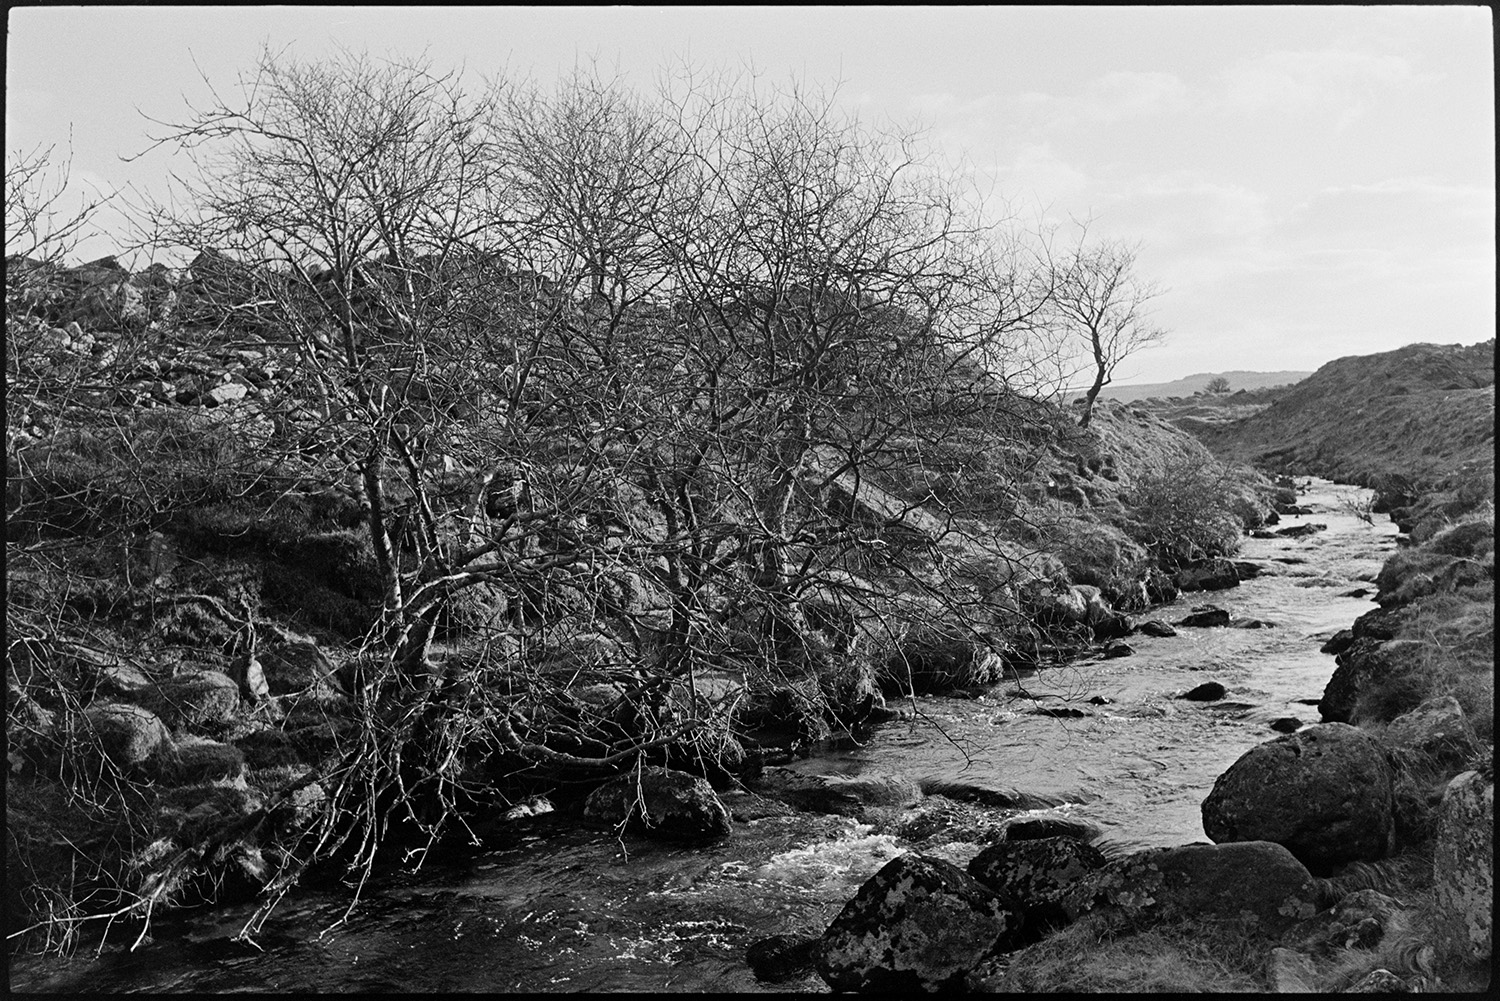 Near the source of the Taw above Belstone. Rocky stream and blasted trees.
[River Taw near its source above Belstone, Dartmoor, lined with bare trees and rocks.]